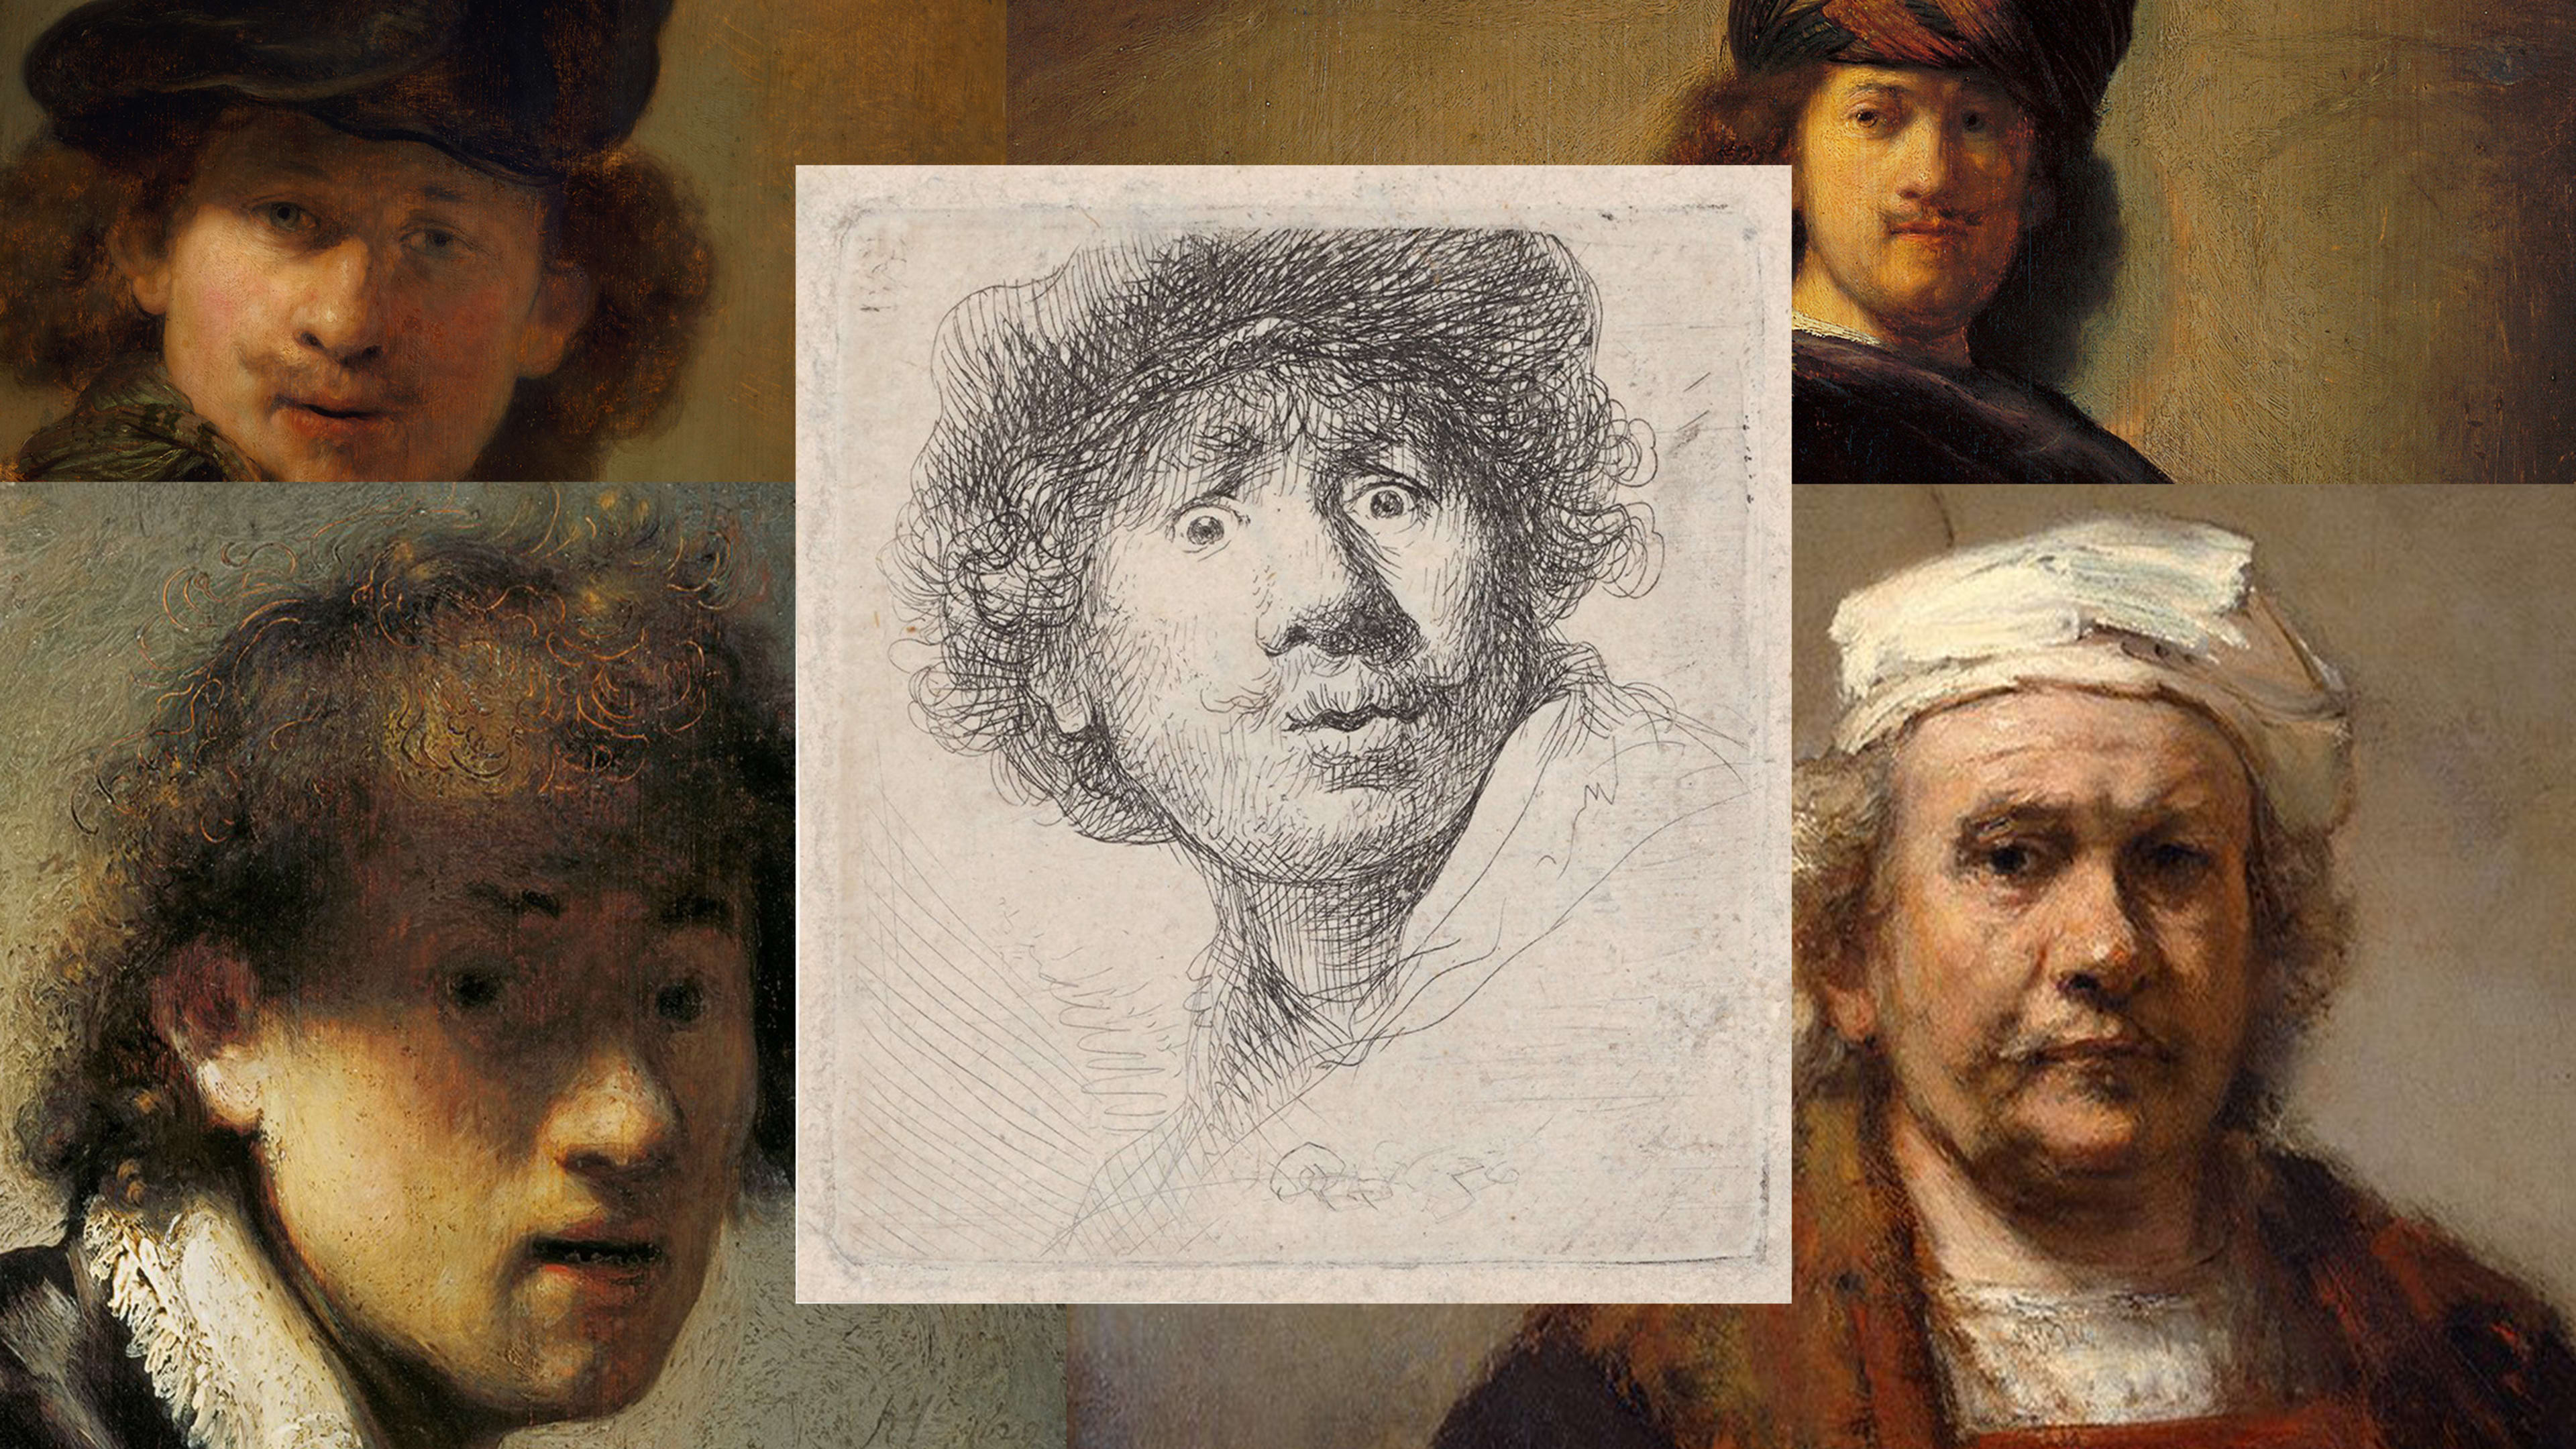 How to take a selfie, according to Rembrandt